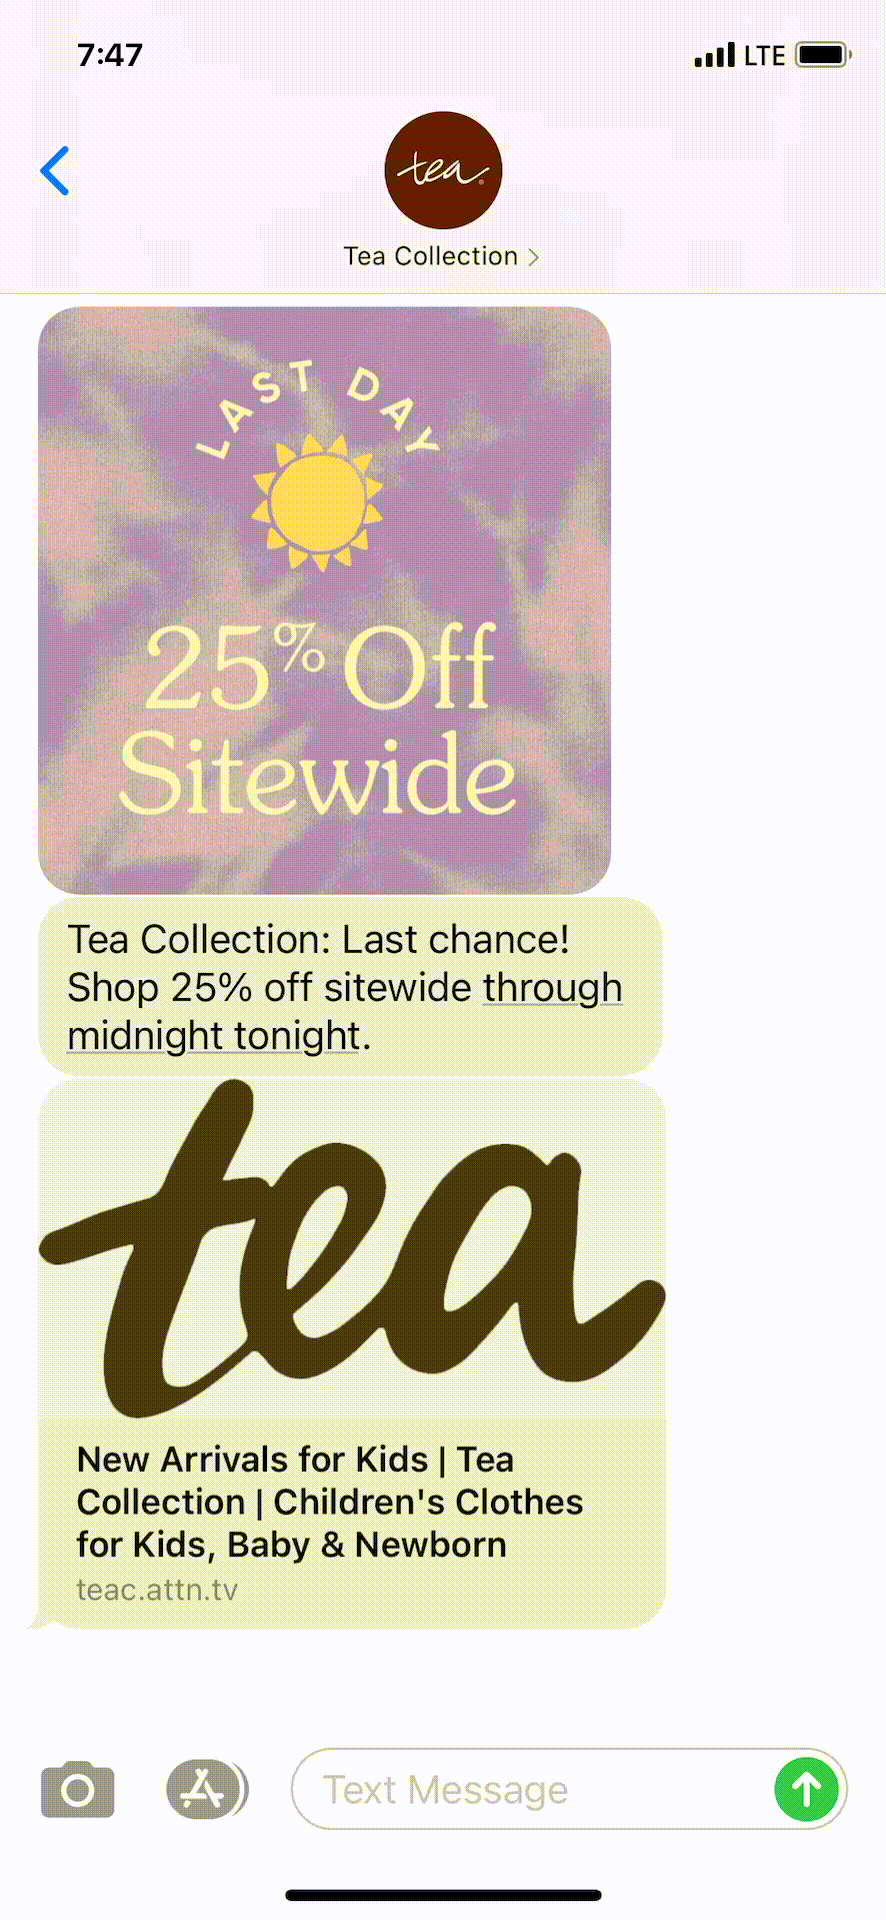 Tea-Collection-Text-Message-Marketing-Example-05.05.2021